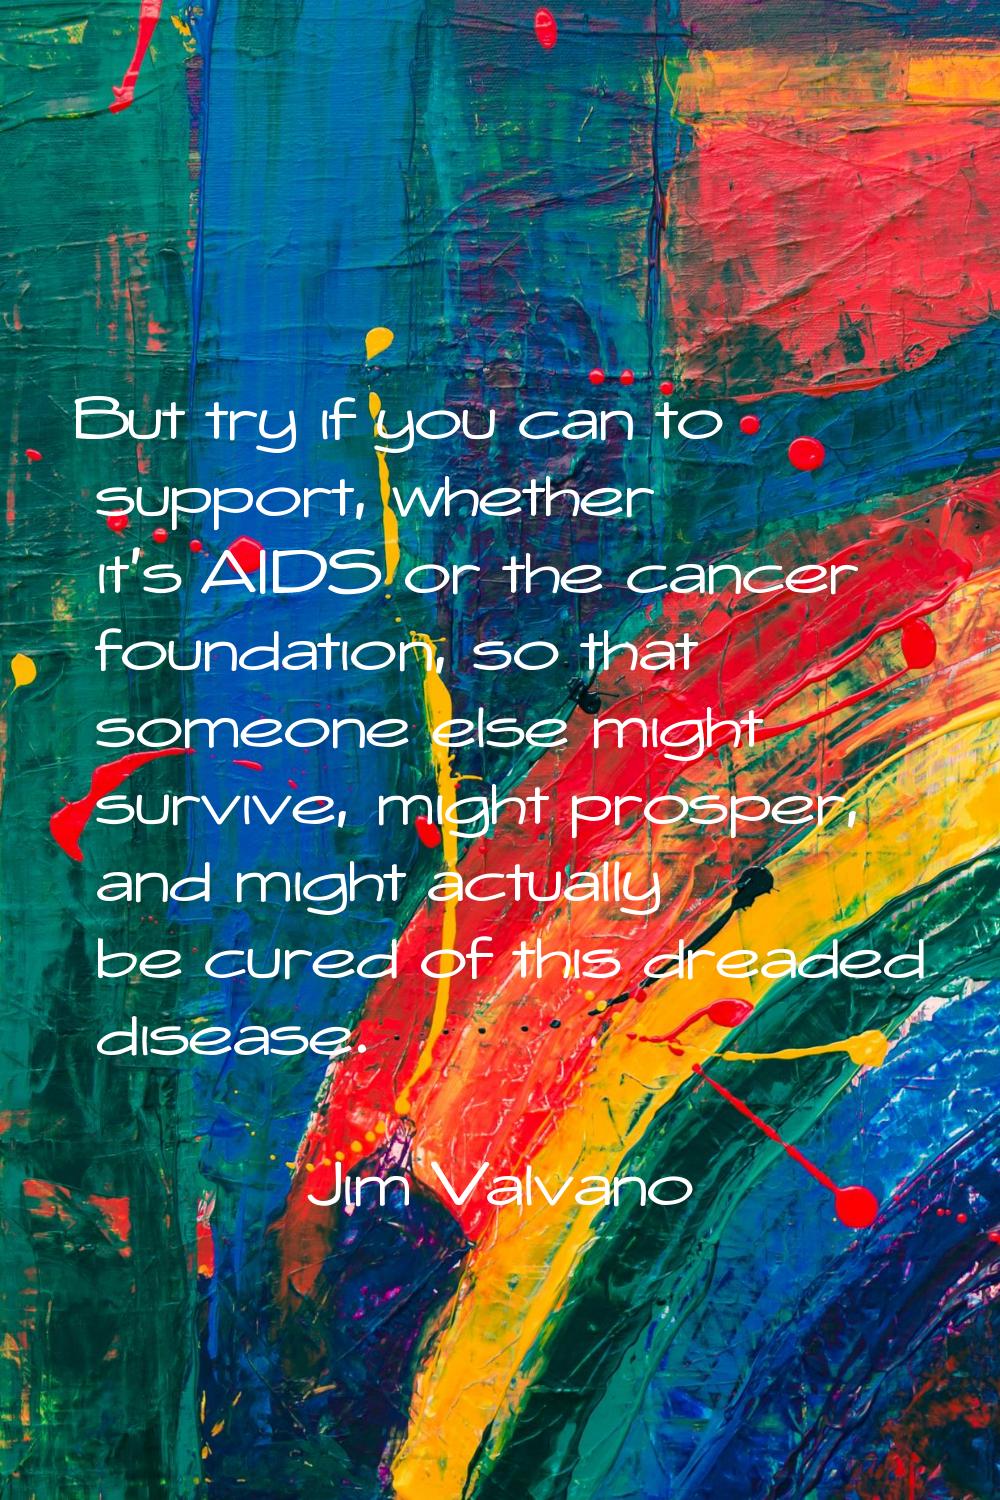 But try if you can to support, whether it's AIDS or the cancer foundation, so that someone else mig